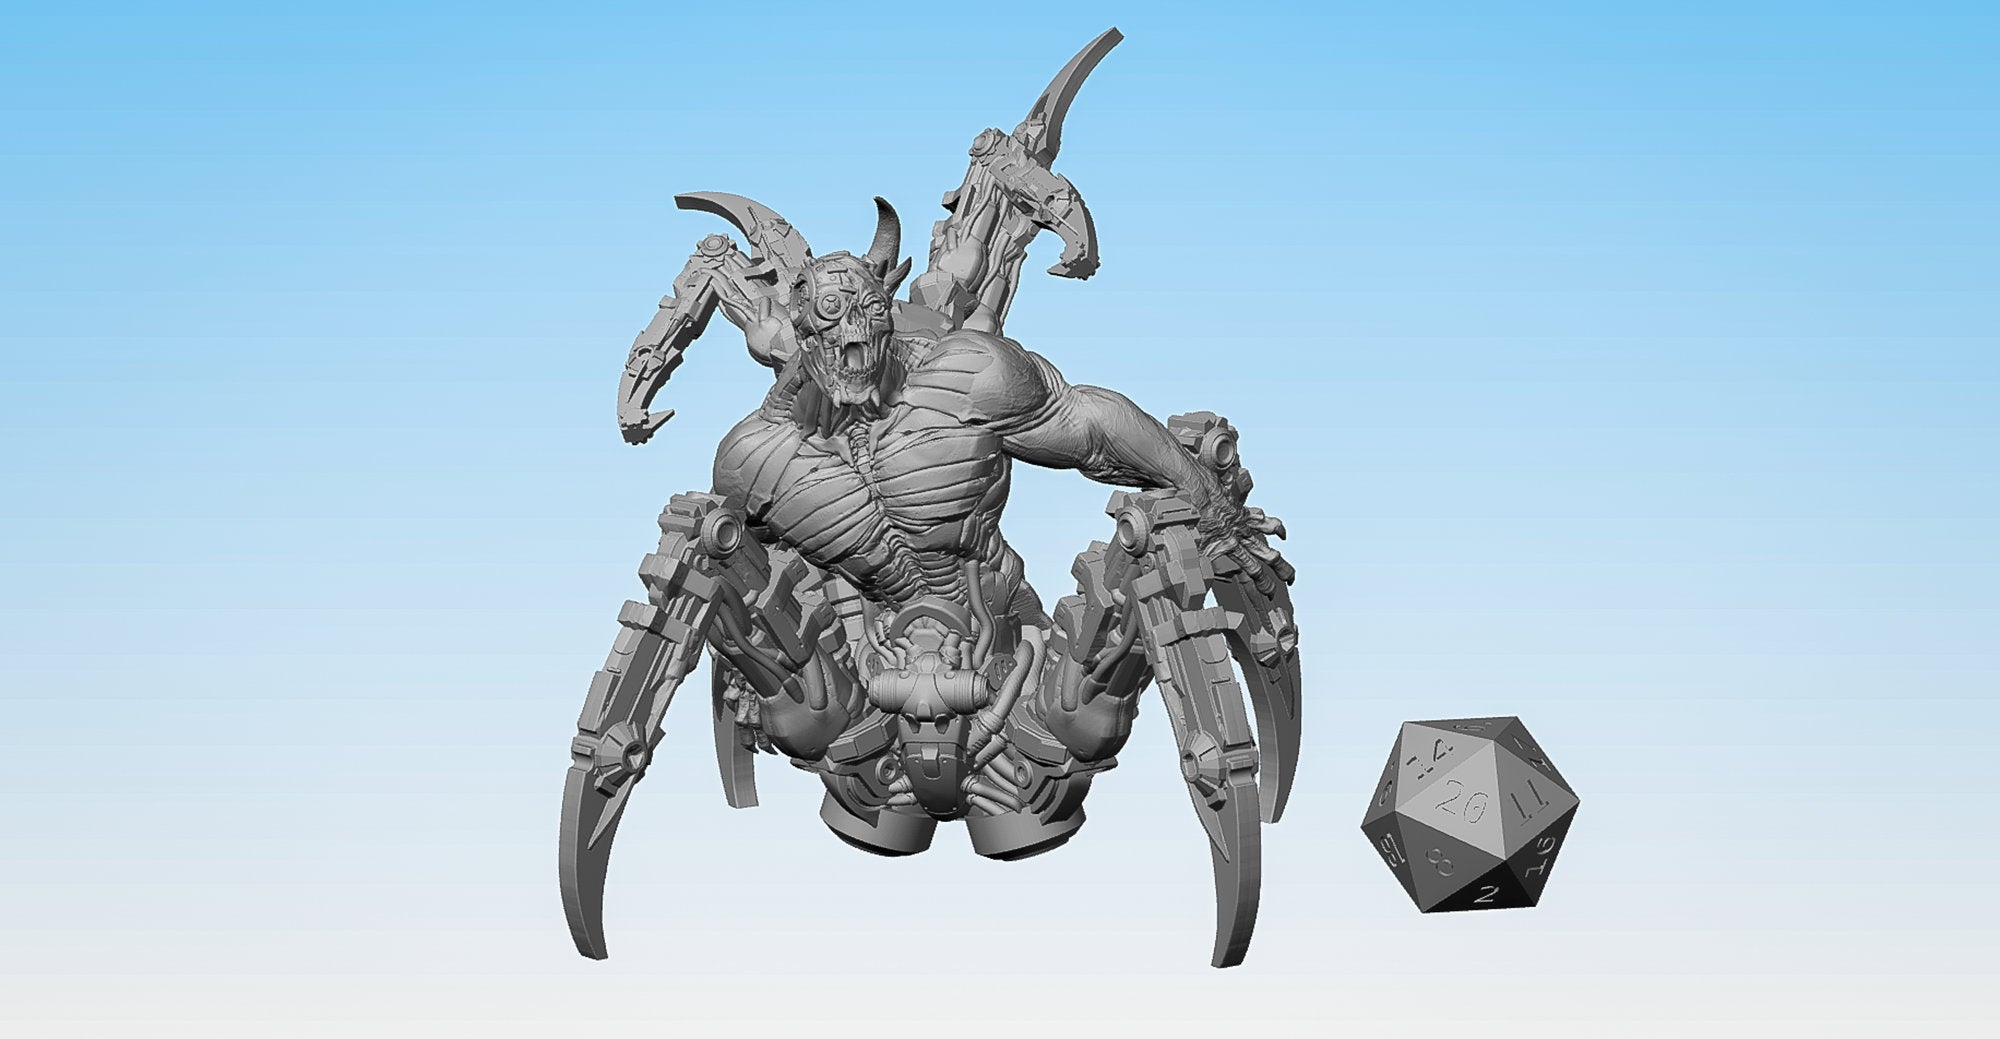 CYBORG DEMON | Dungeons and Dragons | DnD | Pathfinder | Starfinder | Tabletop | RPG | Hero Size | 28 mm-Role Playing Games